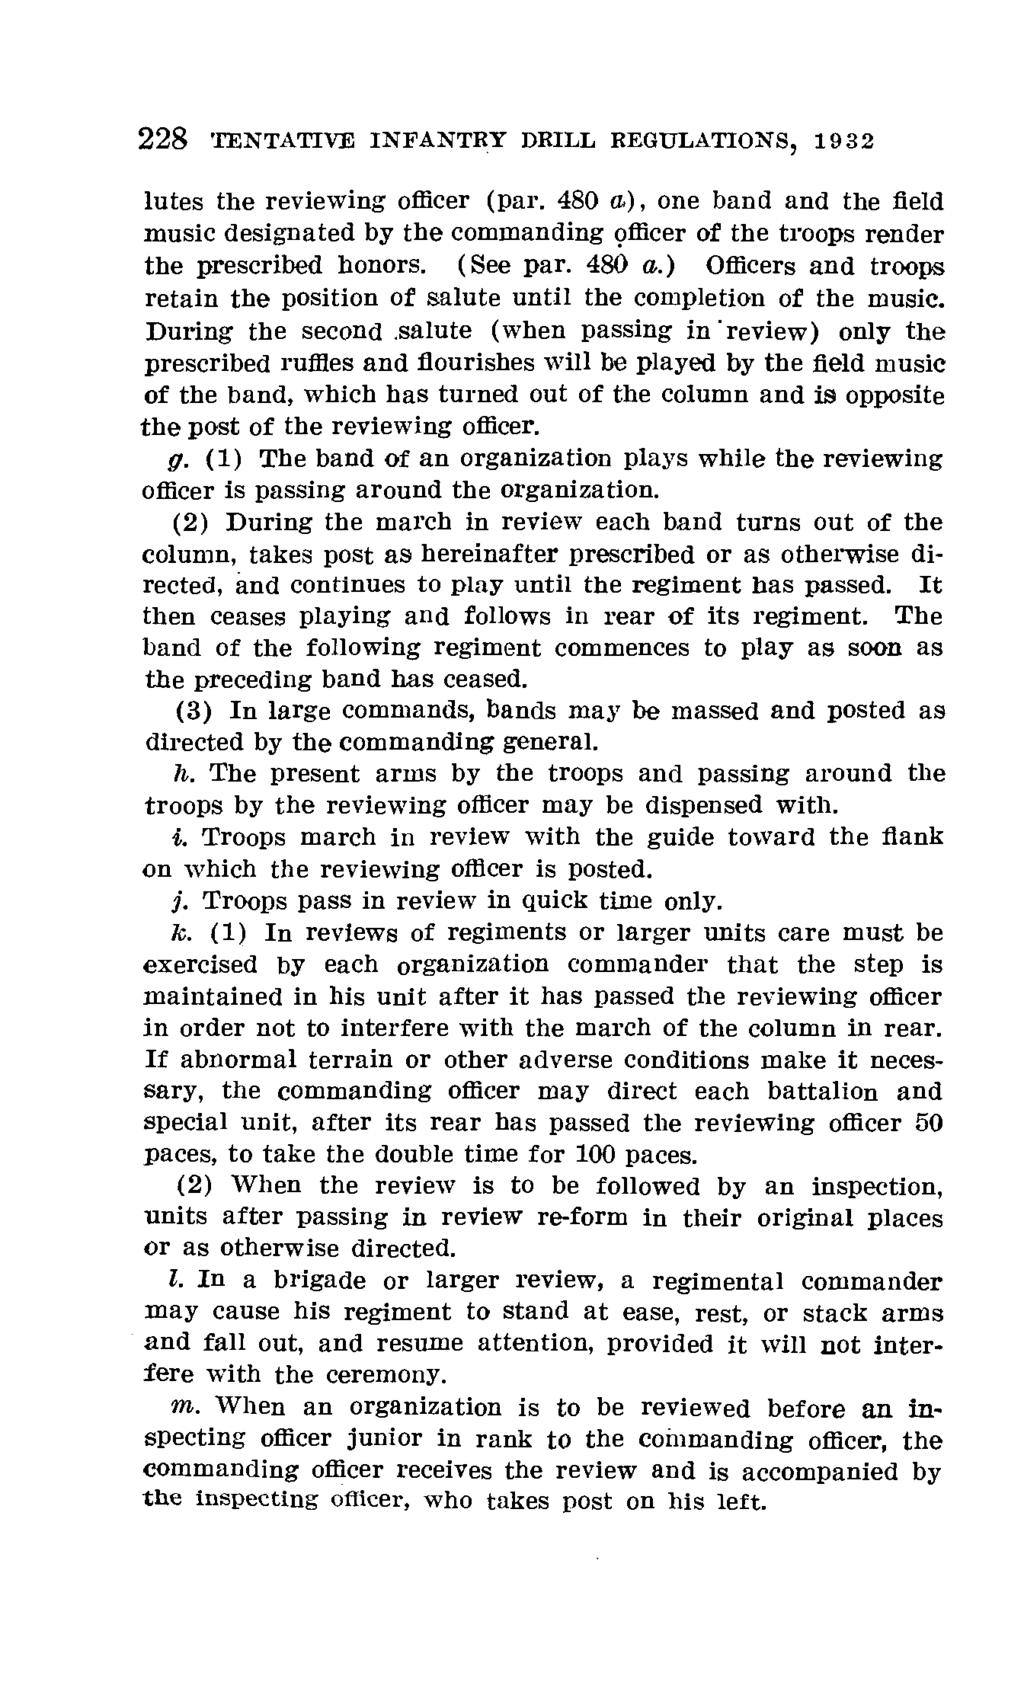 228 TENTATIVE INFANTRY DRILL REGULATIONS, 1932 lutes the reviewing officer (par. 480 a), one band and the field music designated by the commanding officer of the troops render the prescribed honors.